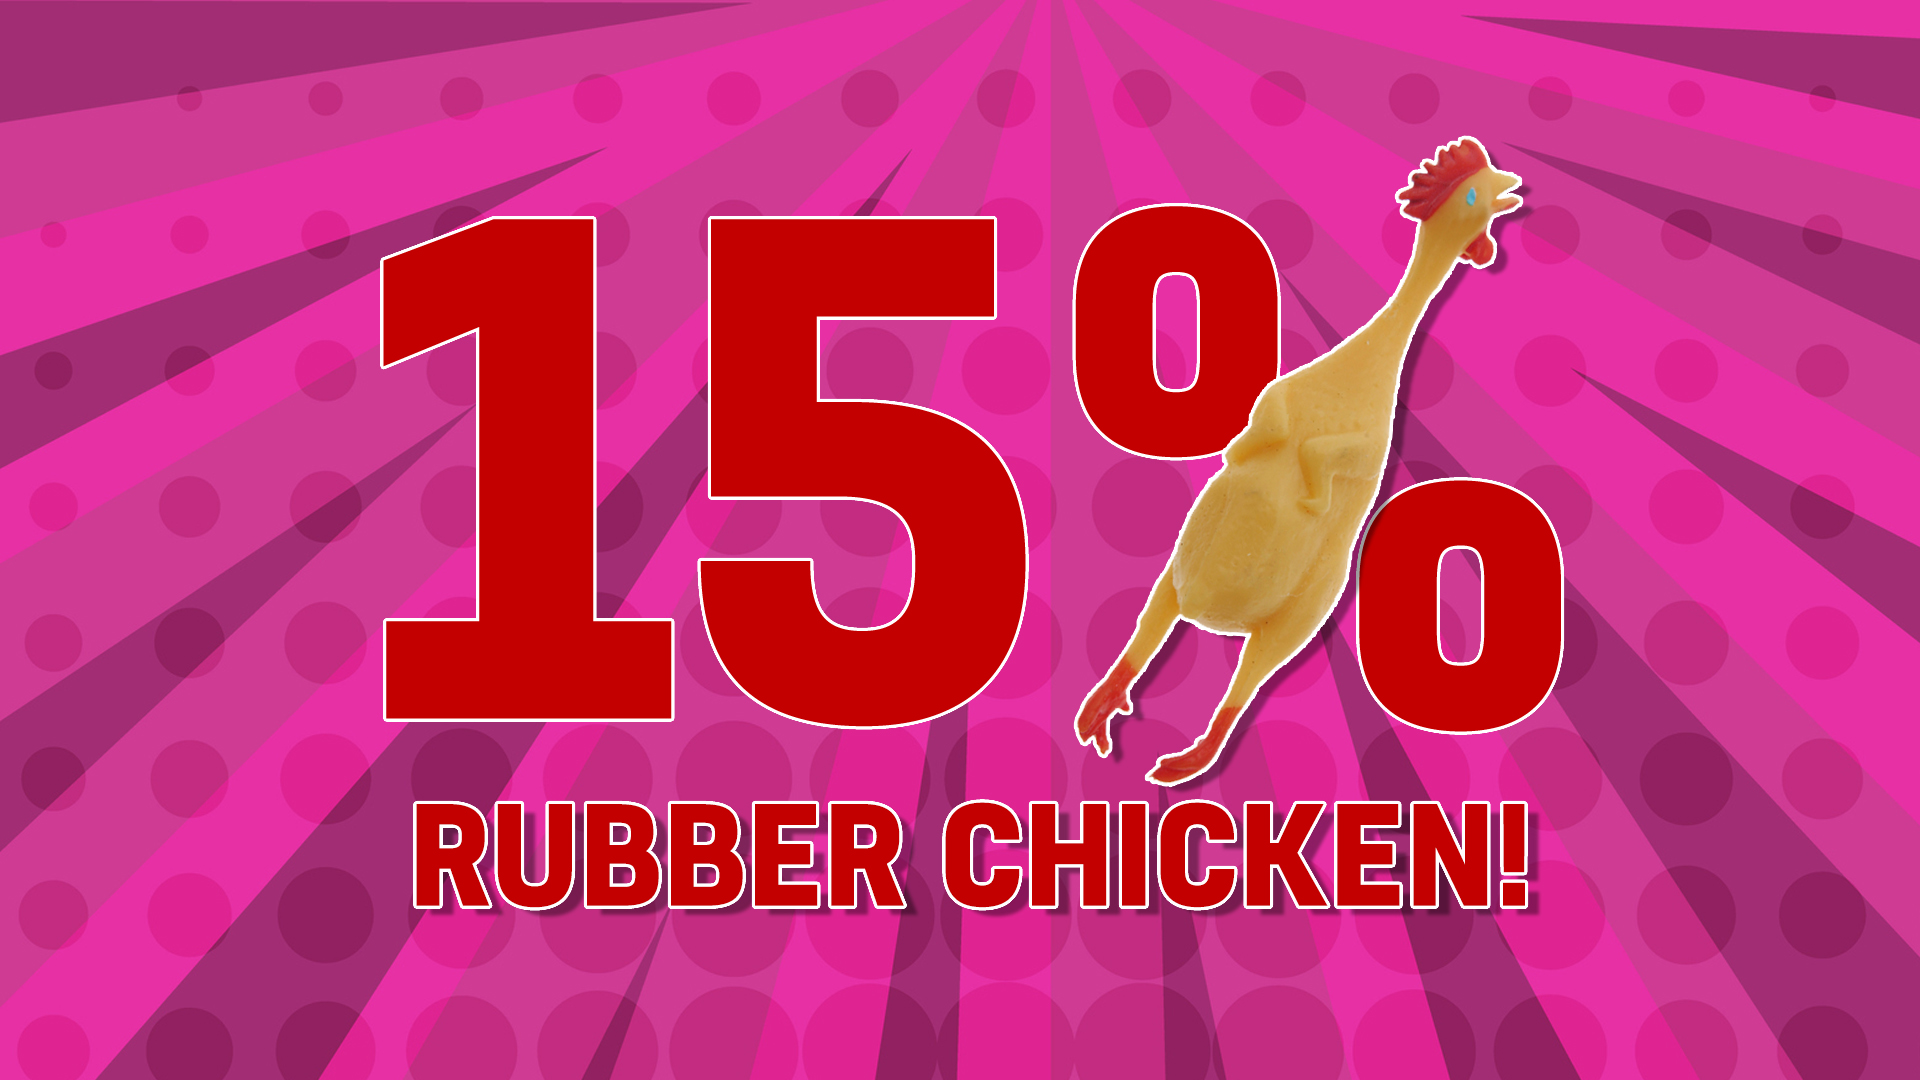 You are: 15% RUBBER CHICKEN!